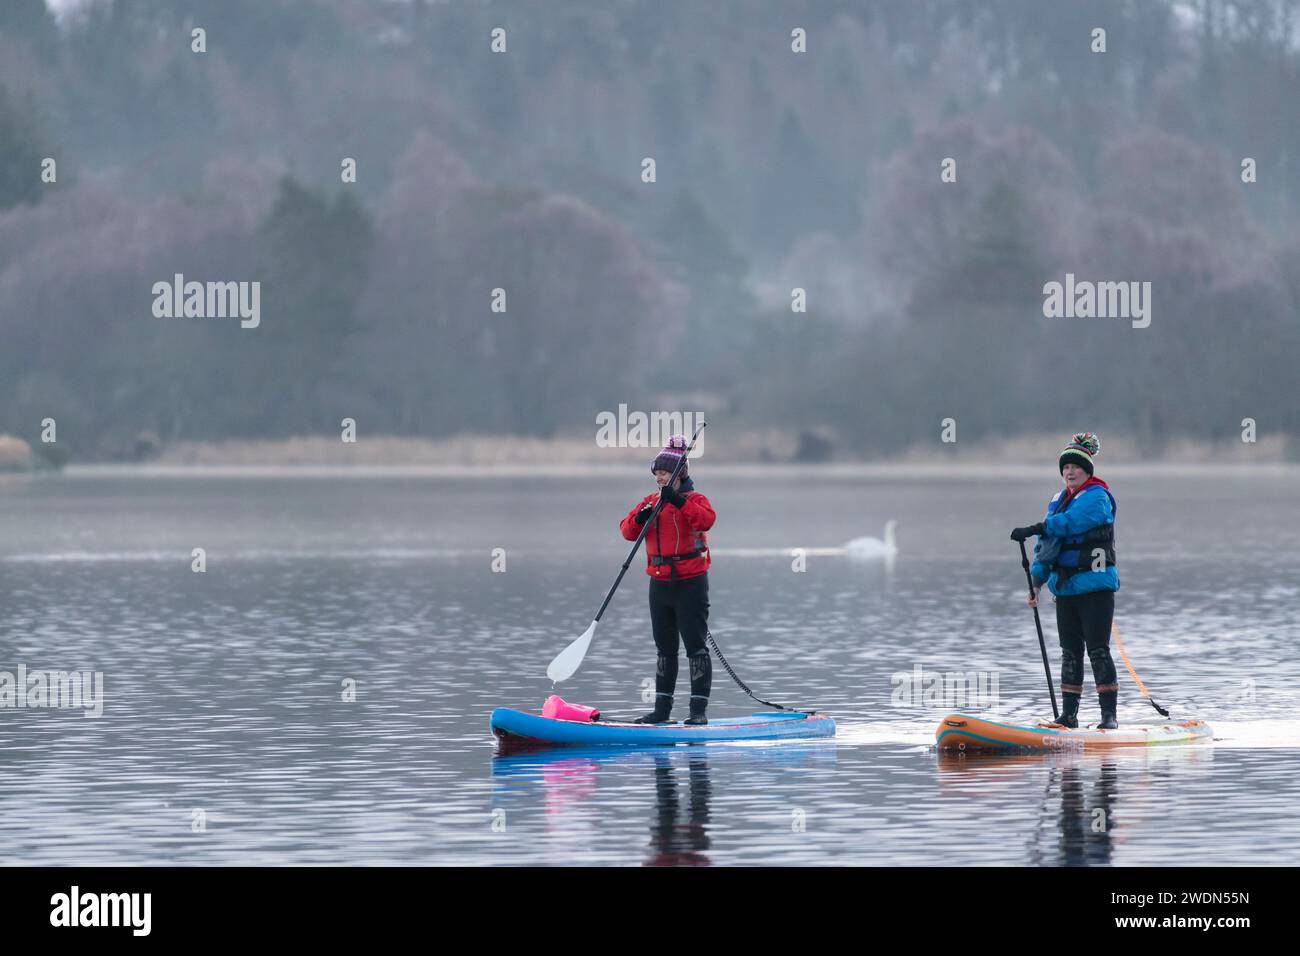 2 Stand Up Paddle Boarders (SUP) on the Loch of Skene Early on a Cold Morning in Winter Stock Photo